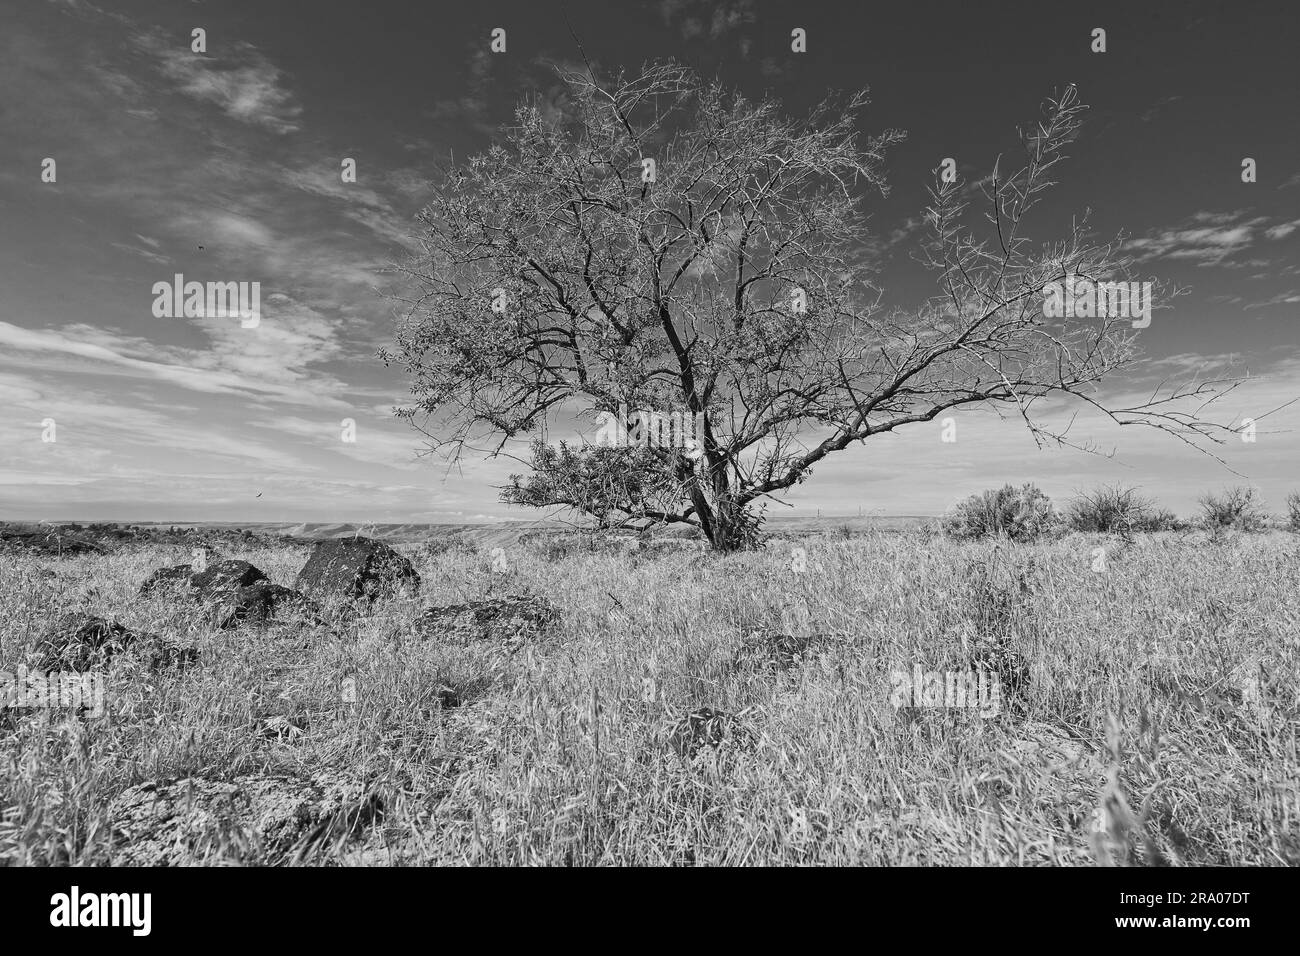 A black and white photo of a small tree standing under a bright clear sky in a field of dry grass layered with rocks near Hagerman, Idaho. Stock Photo